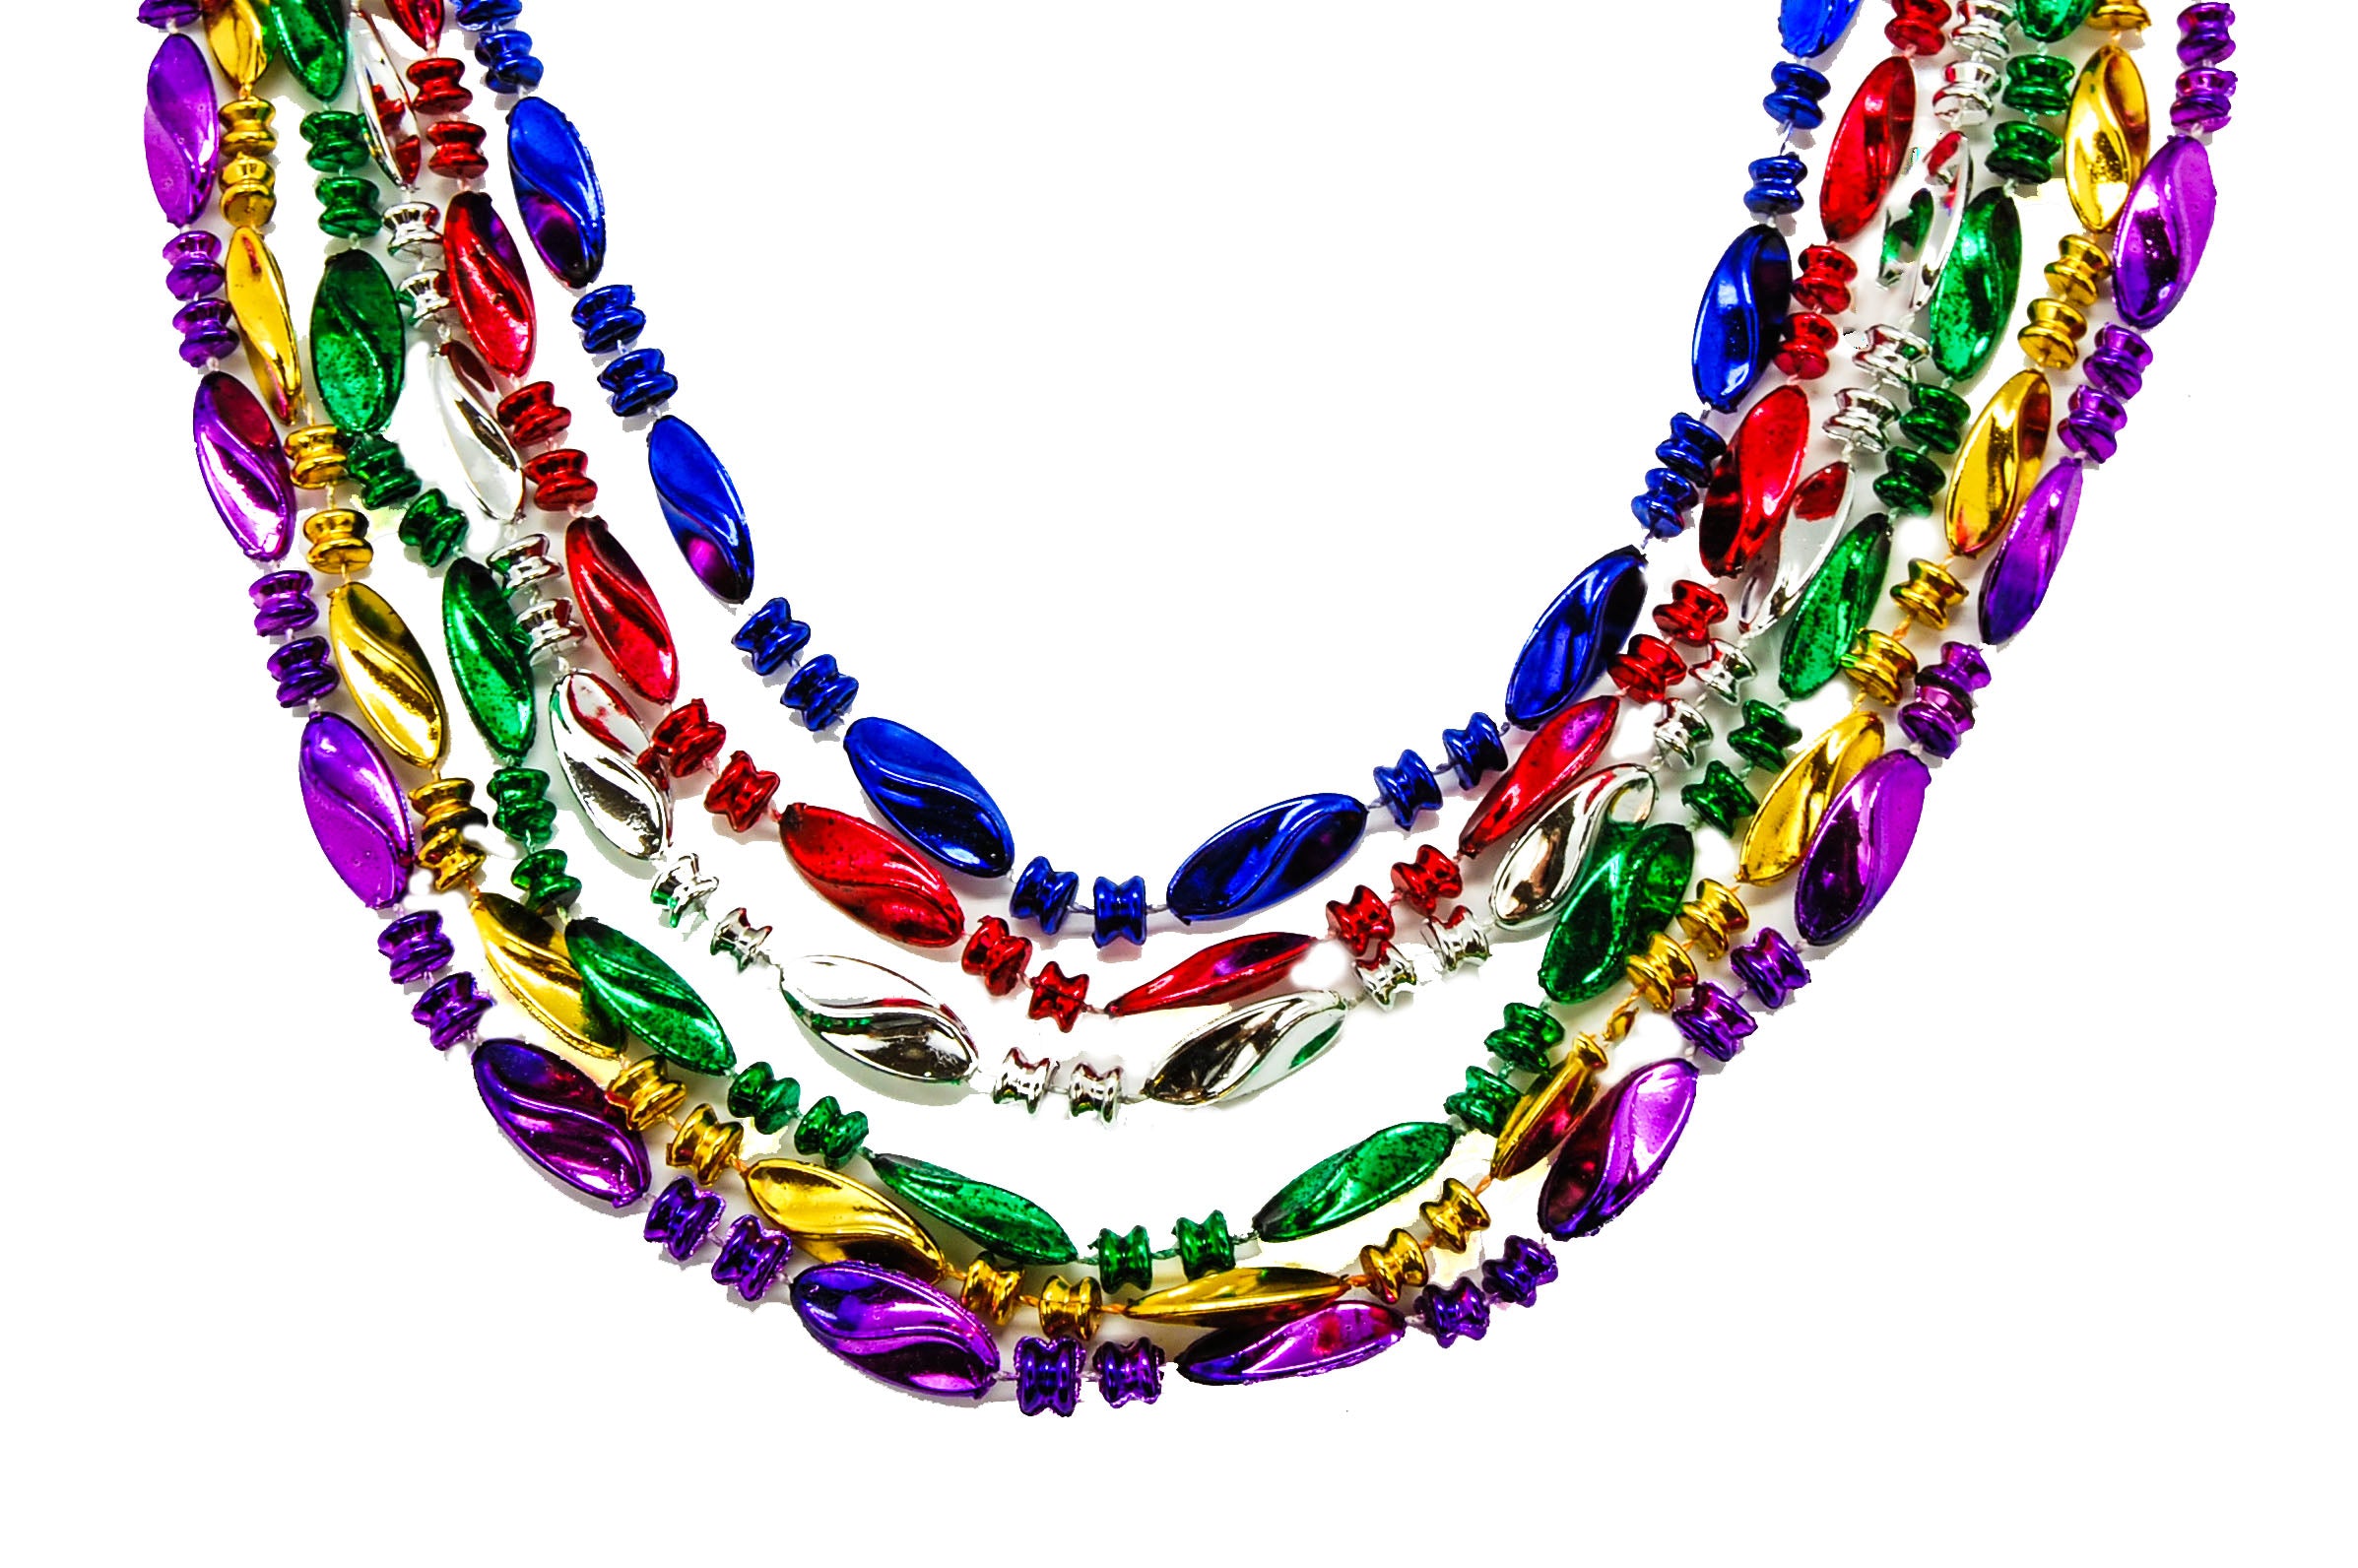 33" Twist Beads Assorted Colors